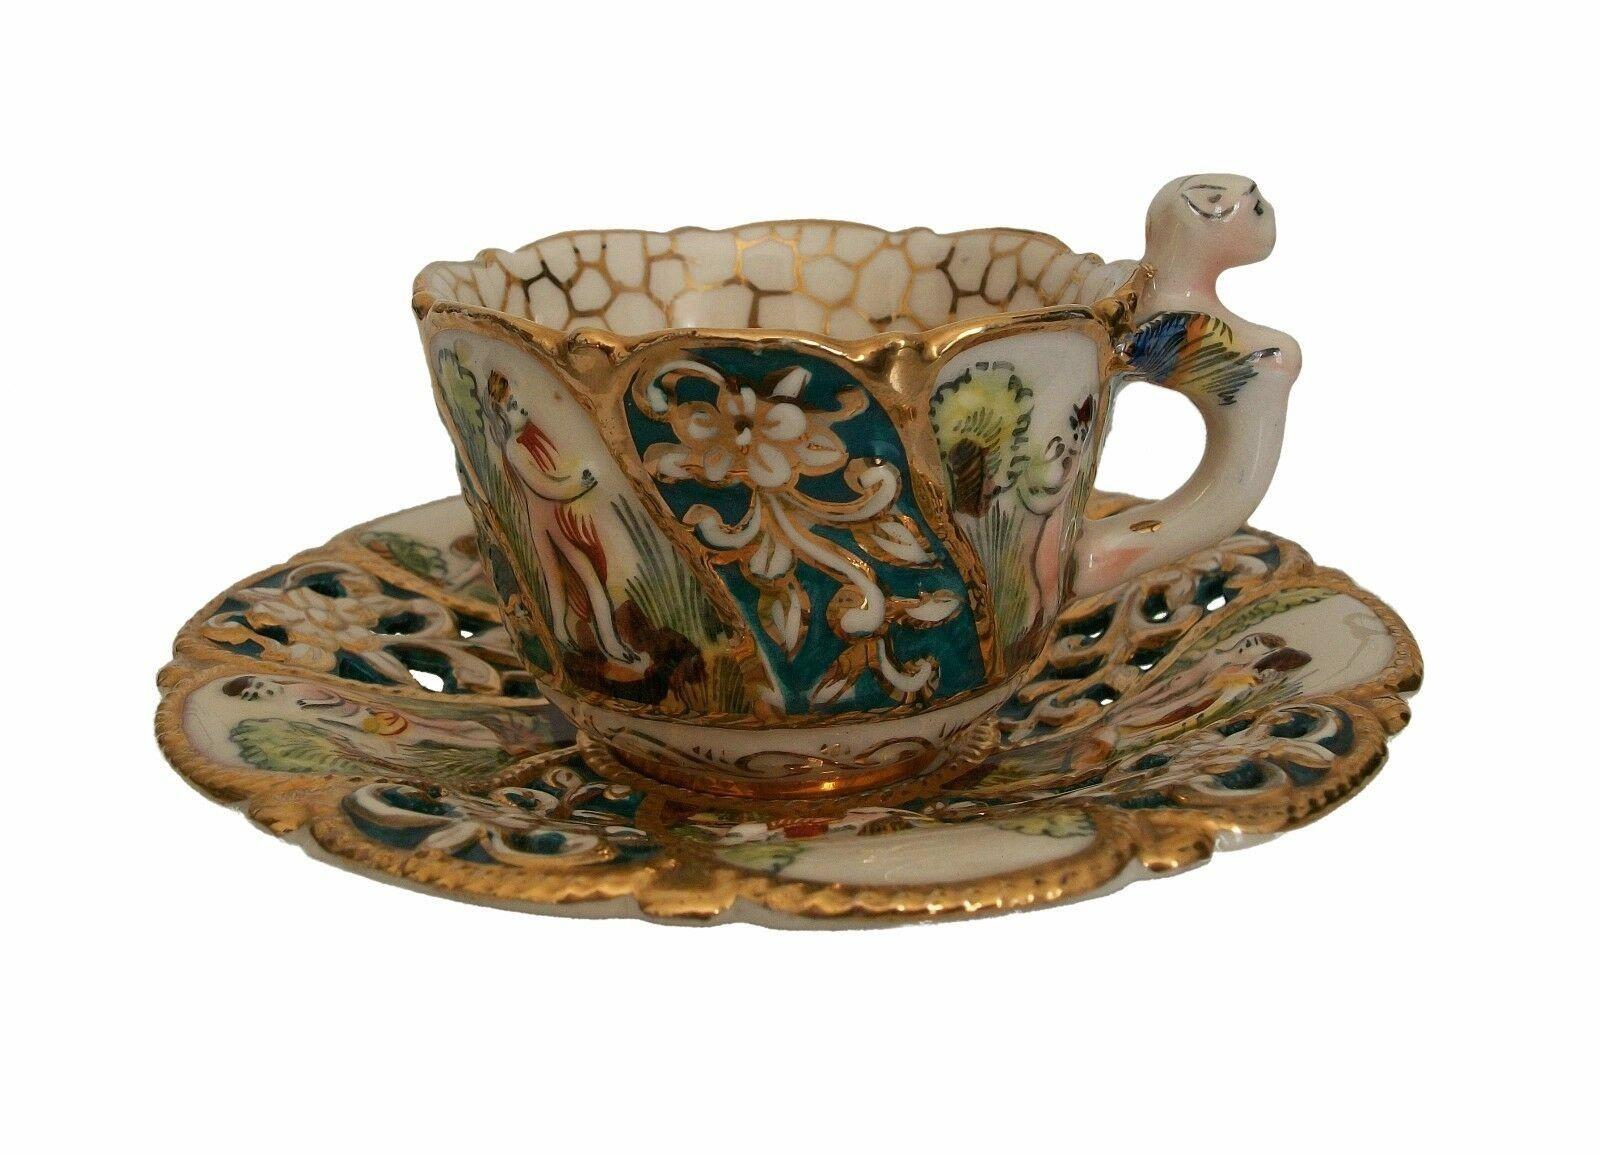 CAPODIMONTE - Fine quality Italian provincial hand painted gilt ceramic cabinet cup and saucer - featuring alternating swirling bands of figures in relief and floral decoration with pierced decoration to the saucer - extensive gilded outlines and